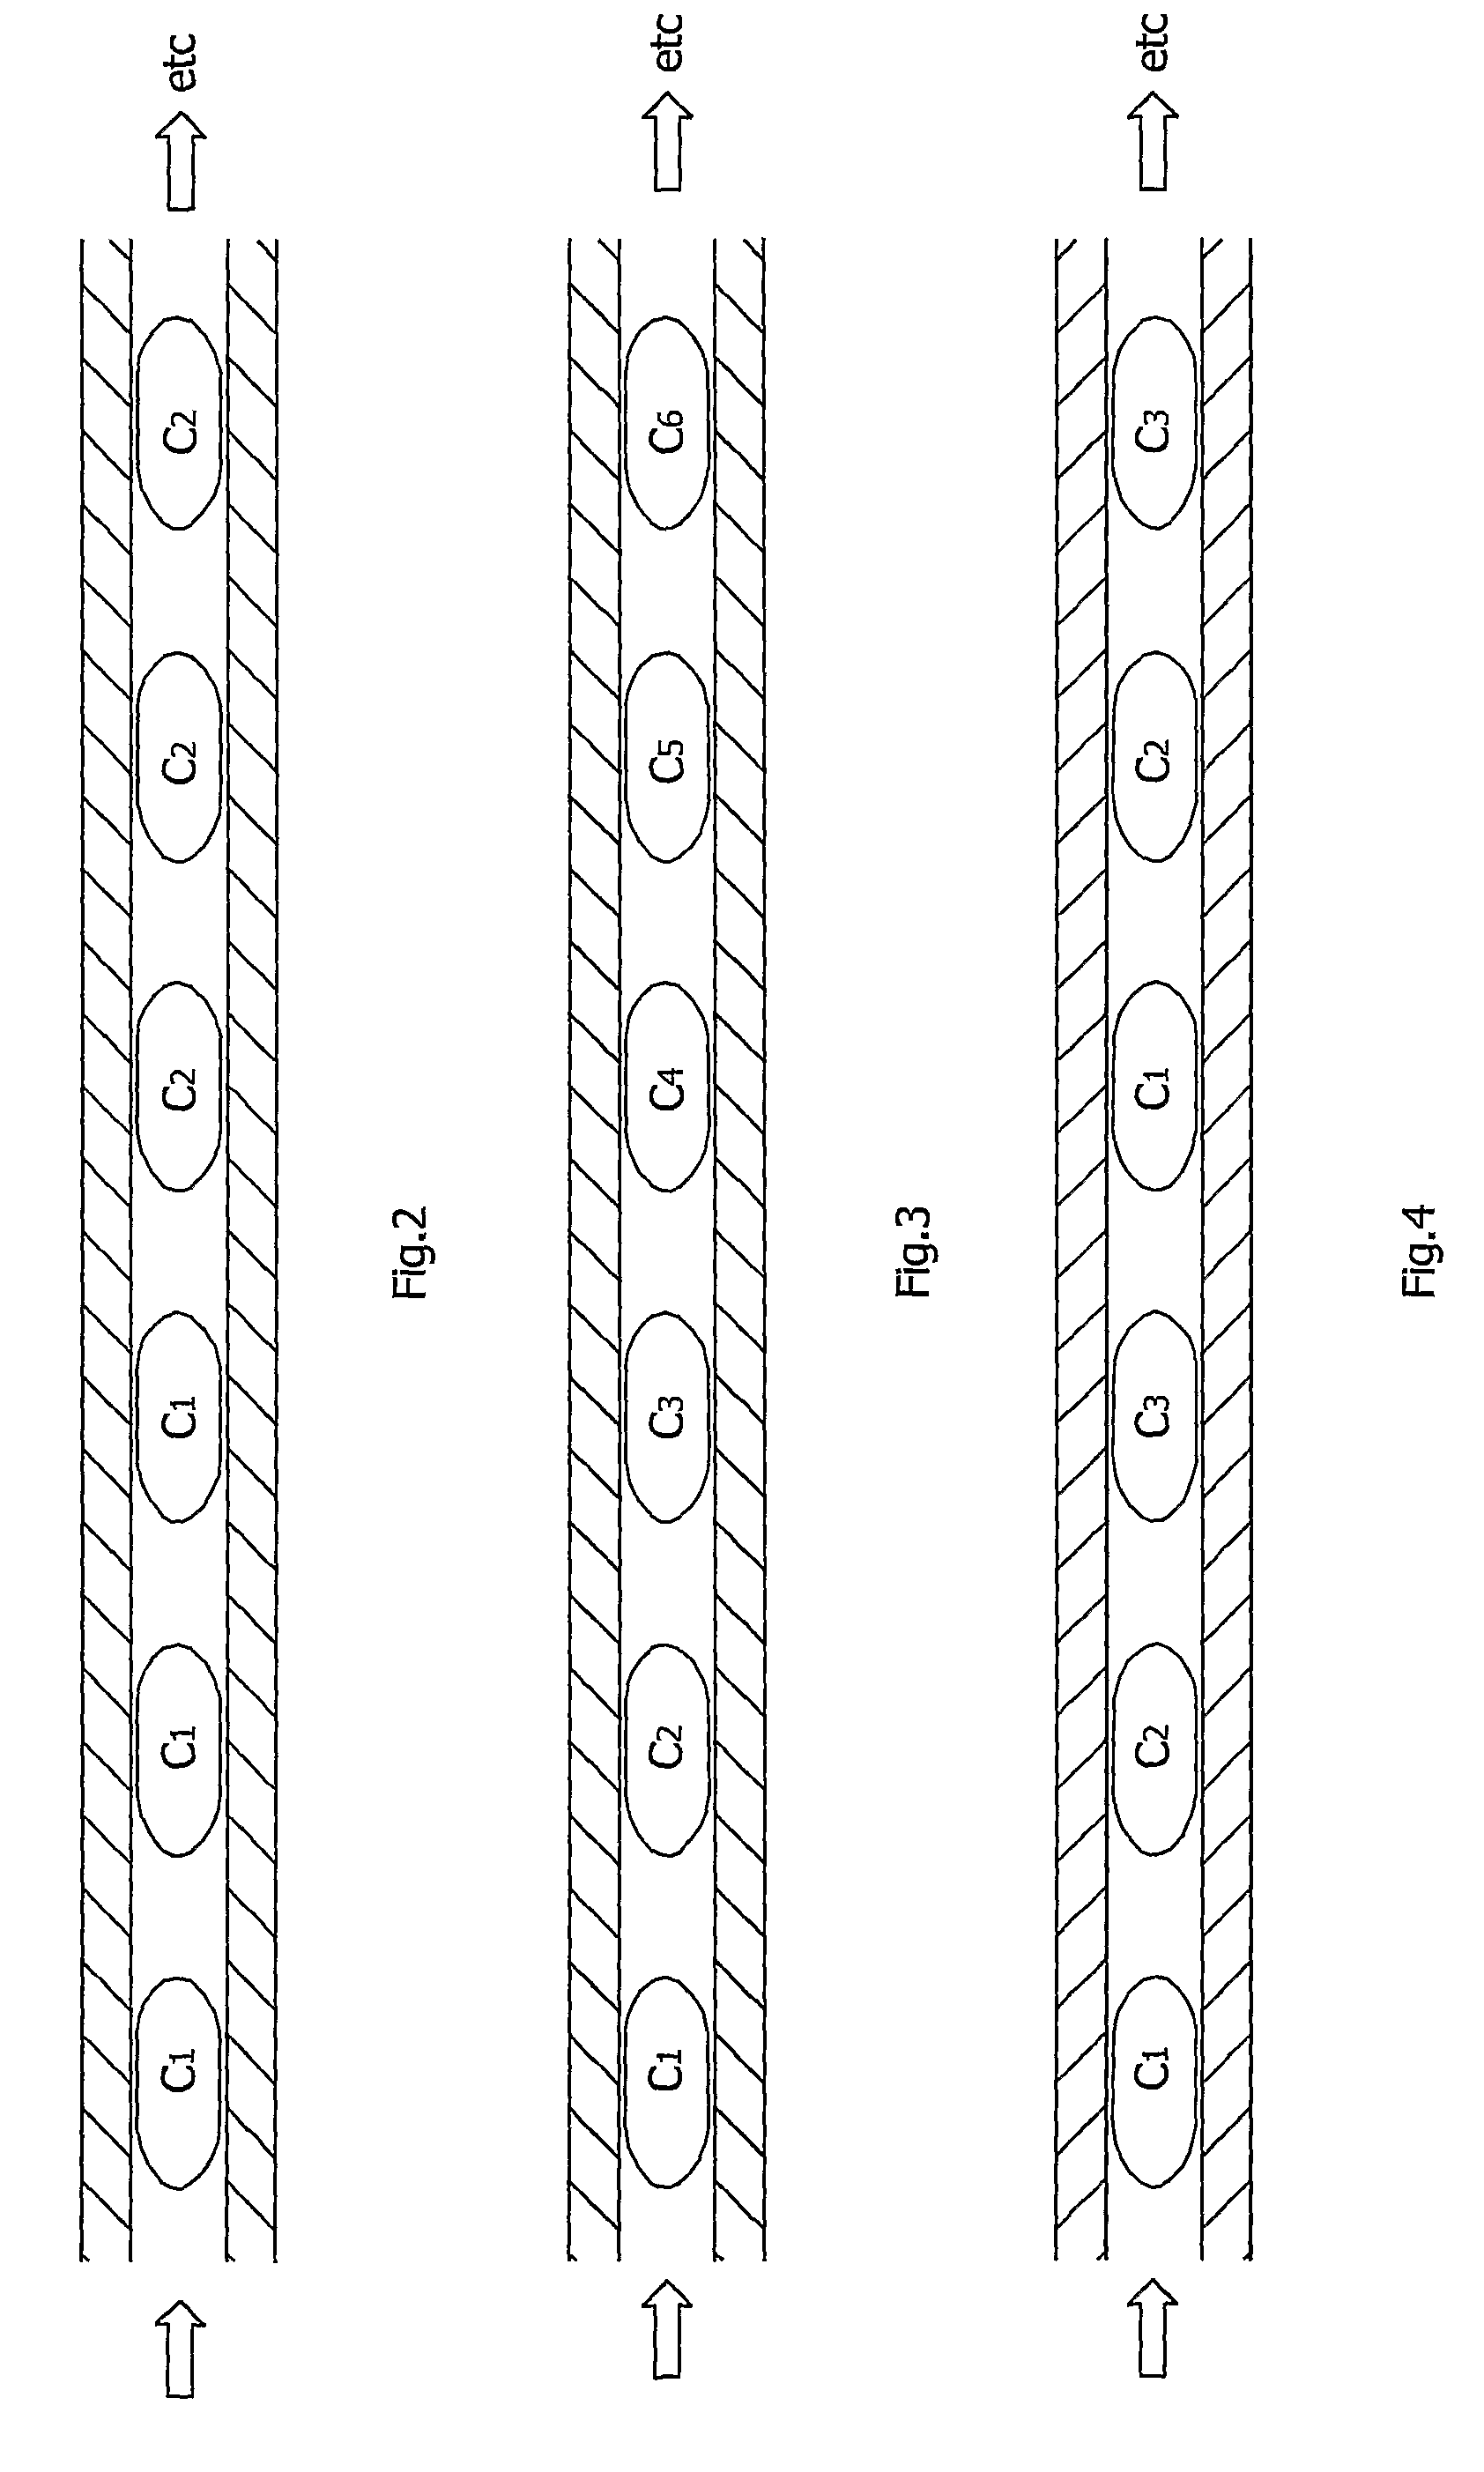 Microfluidic droplet queuing network